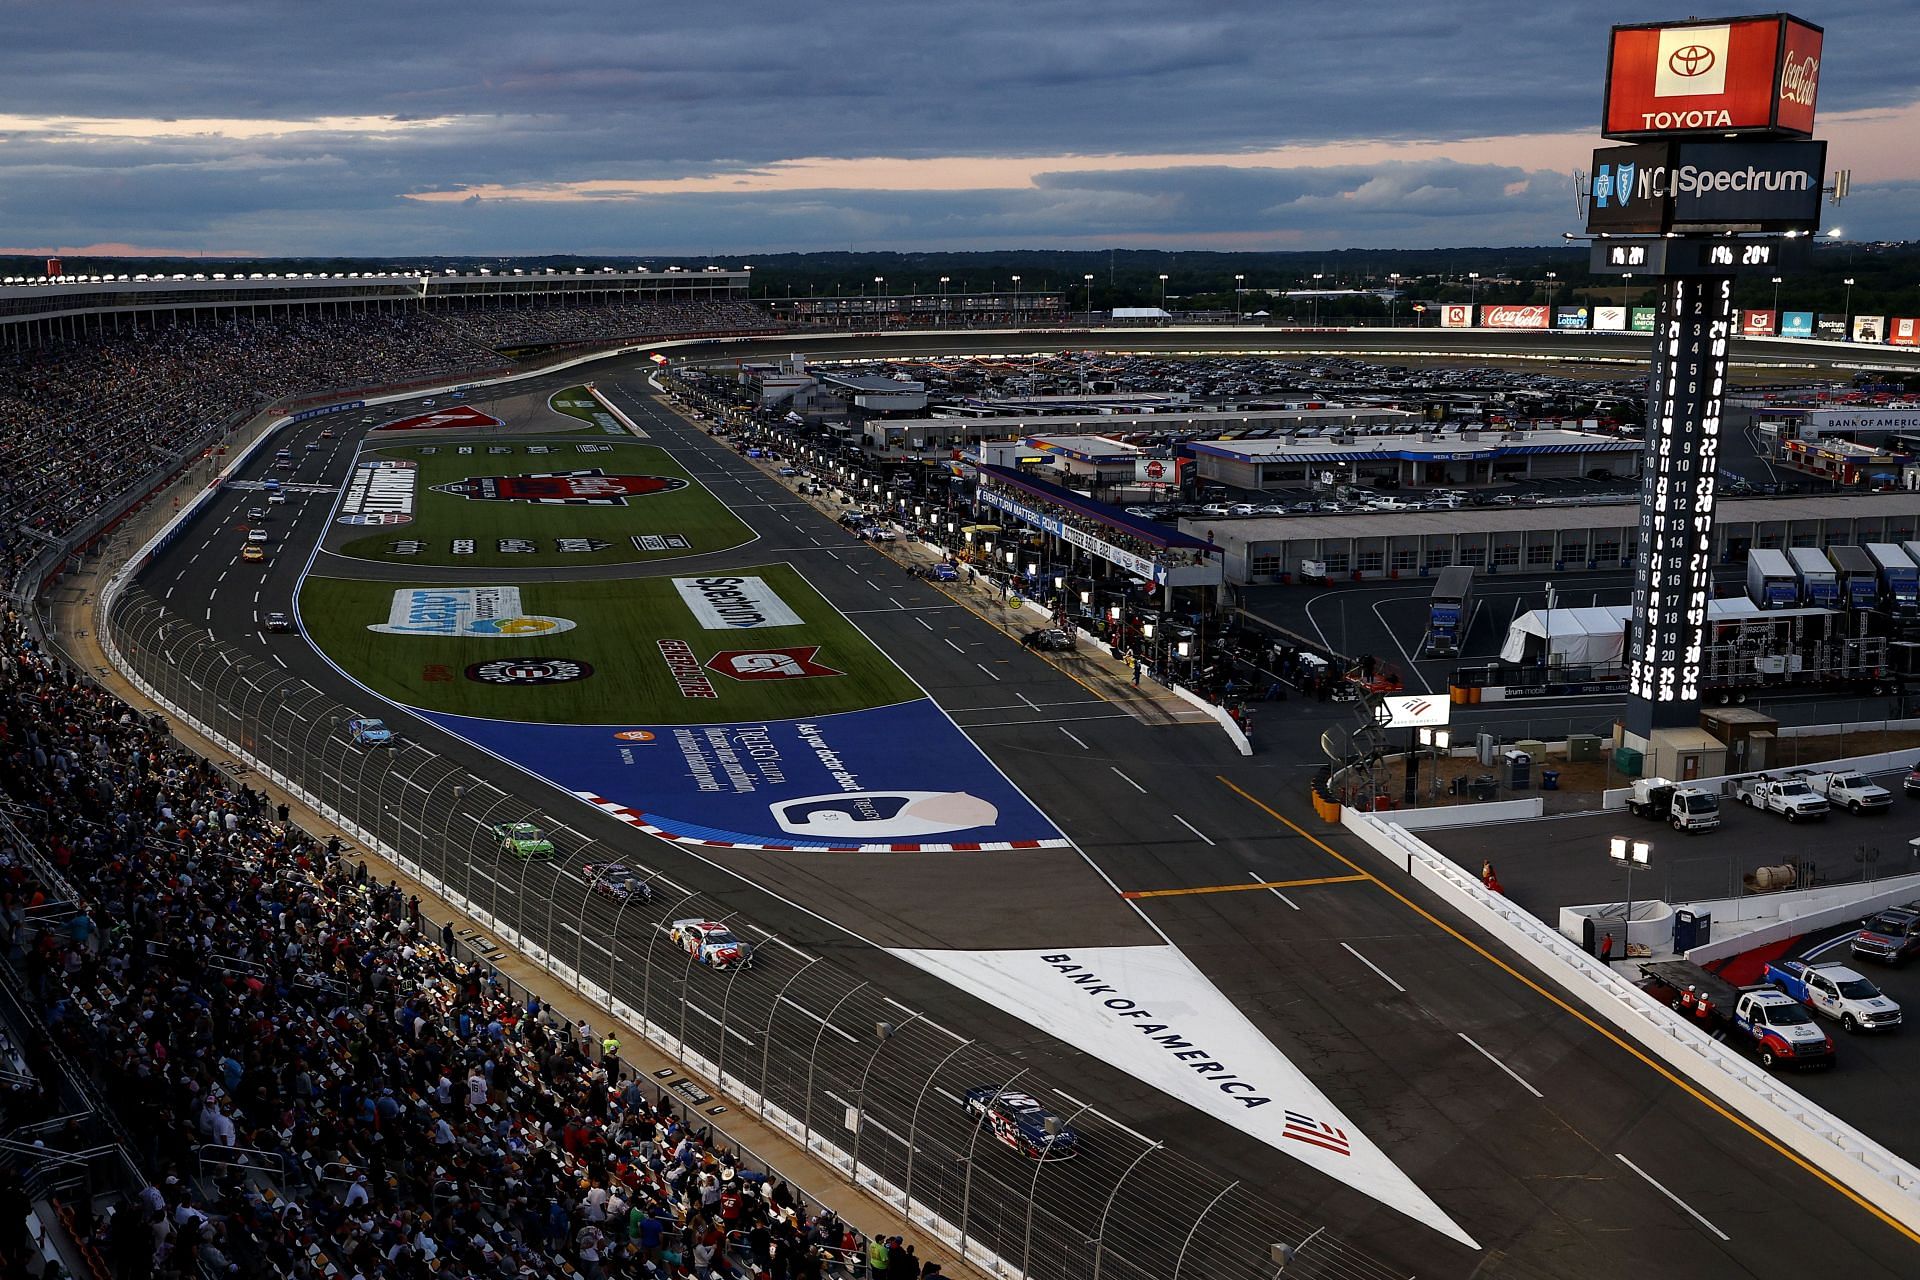 A general view of cars on track during the NASCAR Cup Series Coca-Cola 600 at Charlotte Motor Speedway in Concord, North Carolina (Photo by Maddie Meyer/Getty Images)